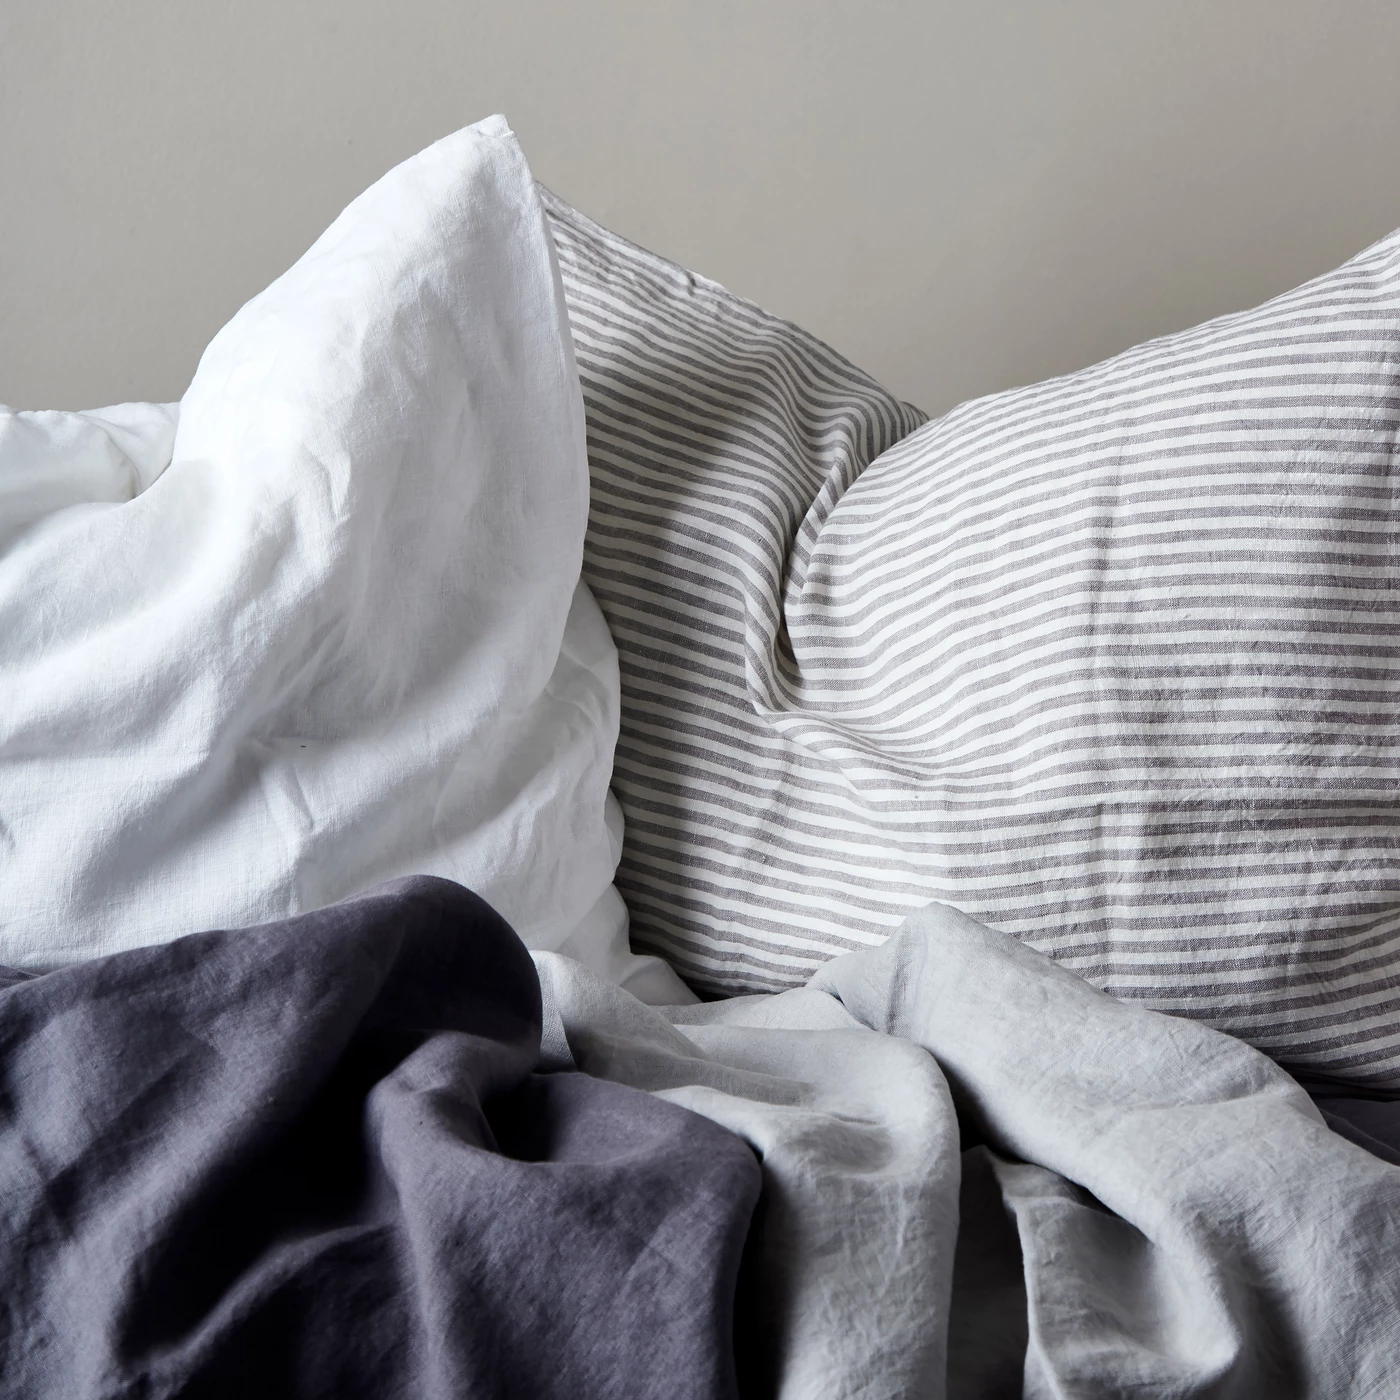 OUR TOP TIPS TO MAKE YOUR LINEN SHEETS LAST LONGER.